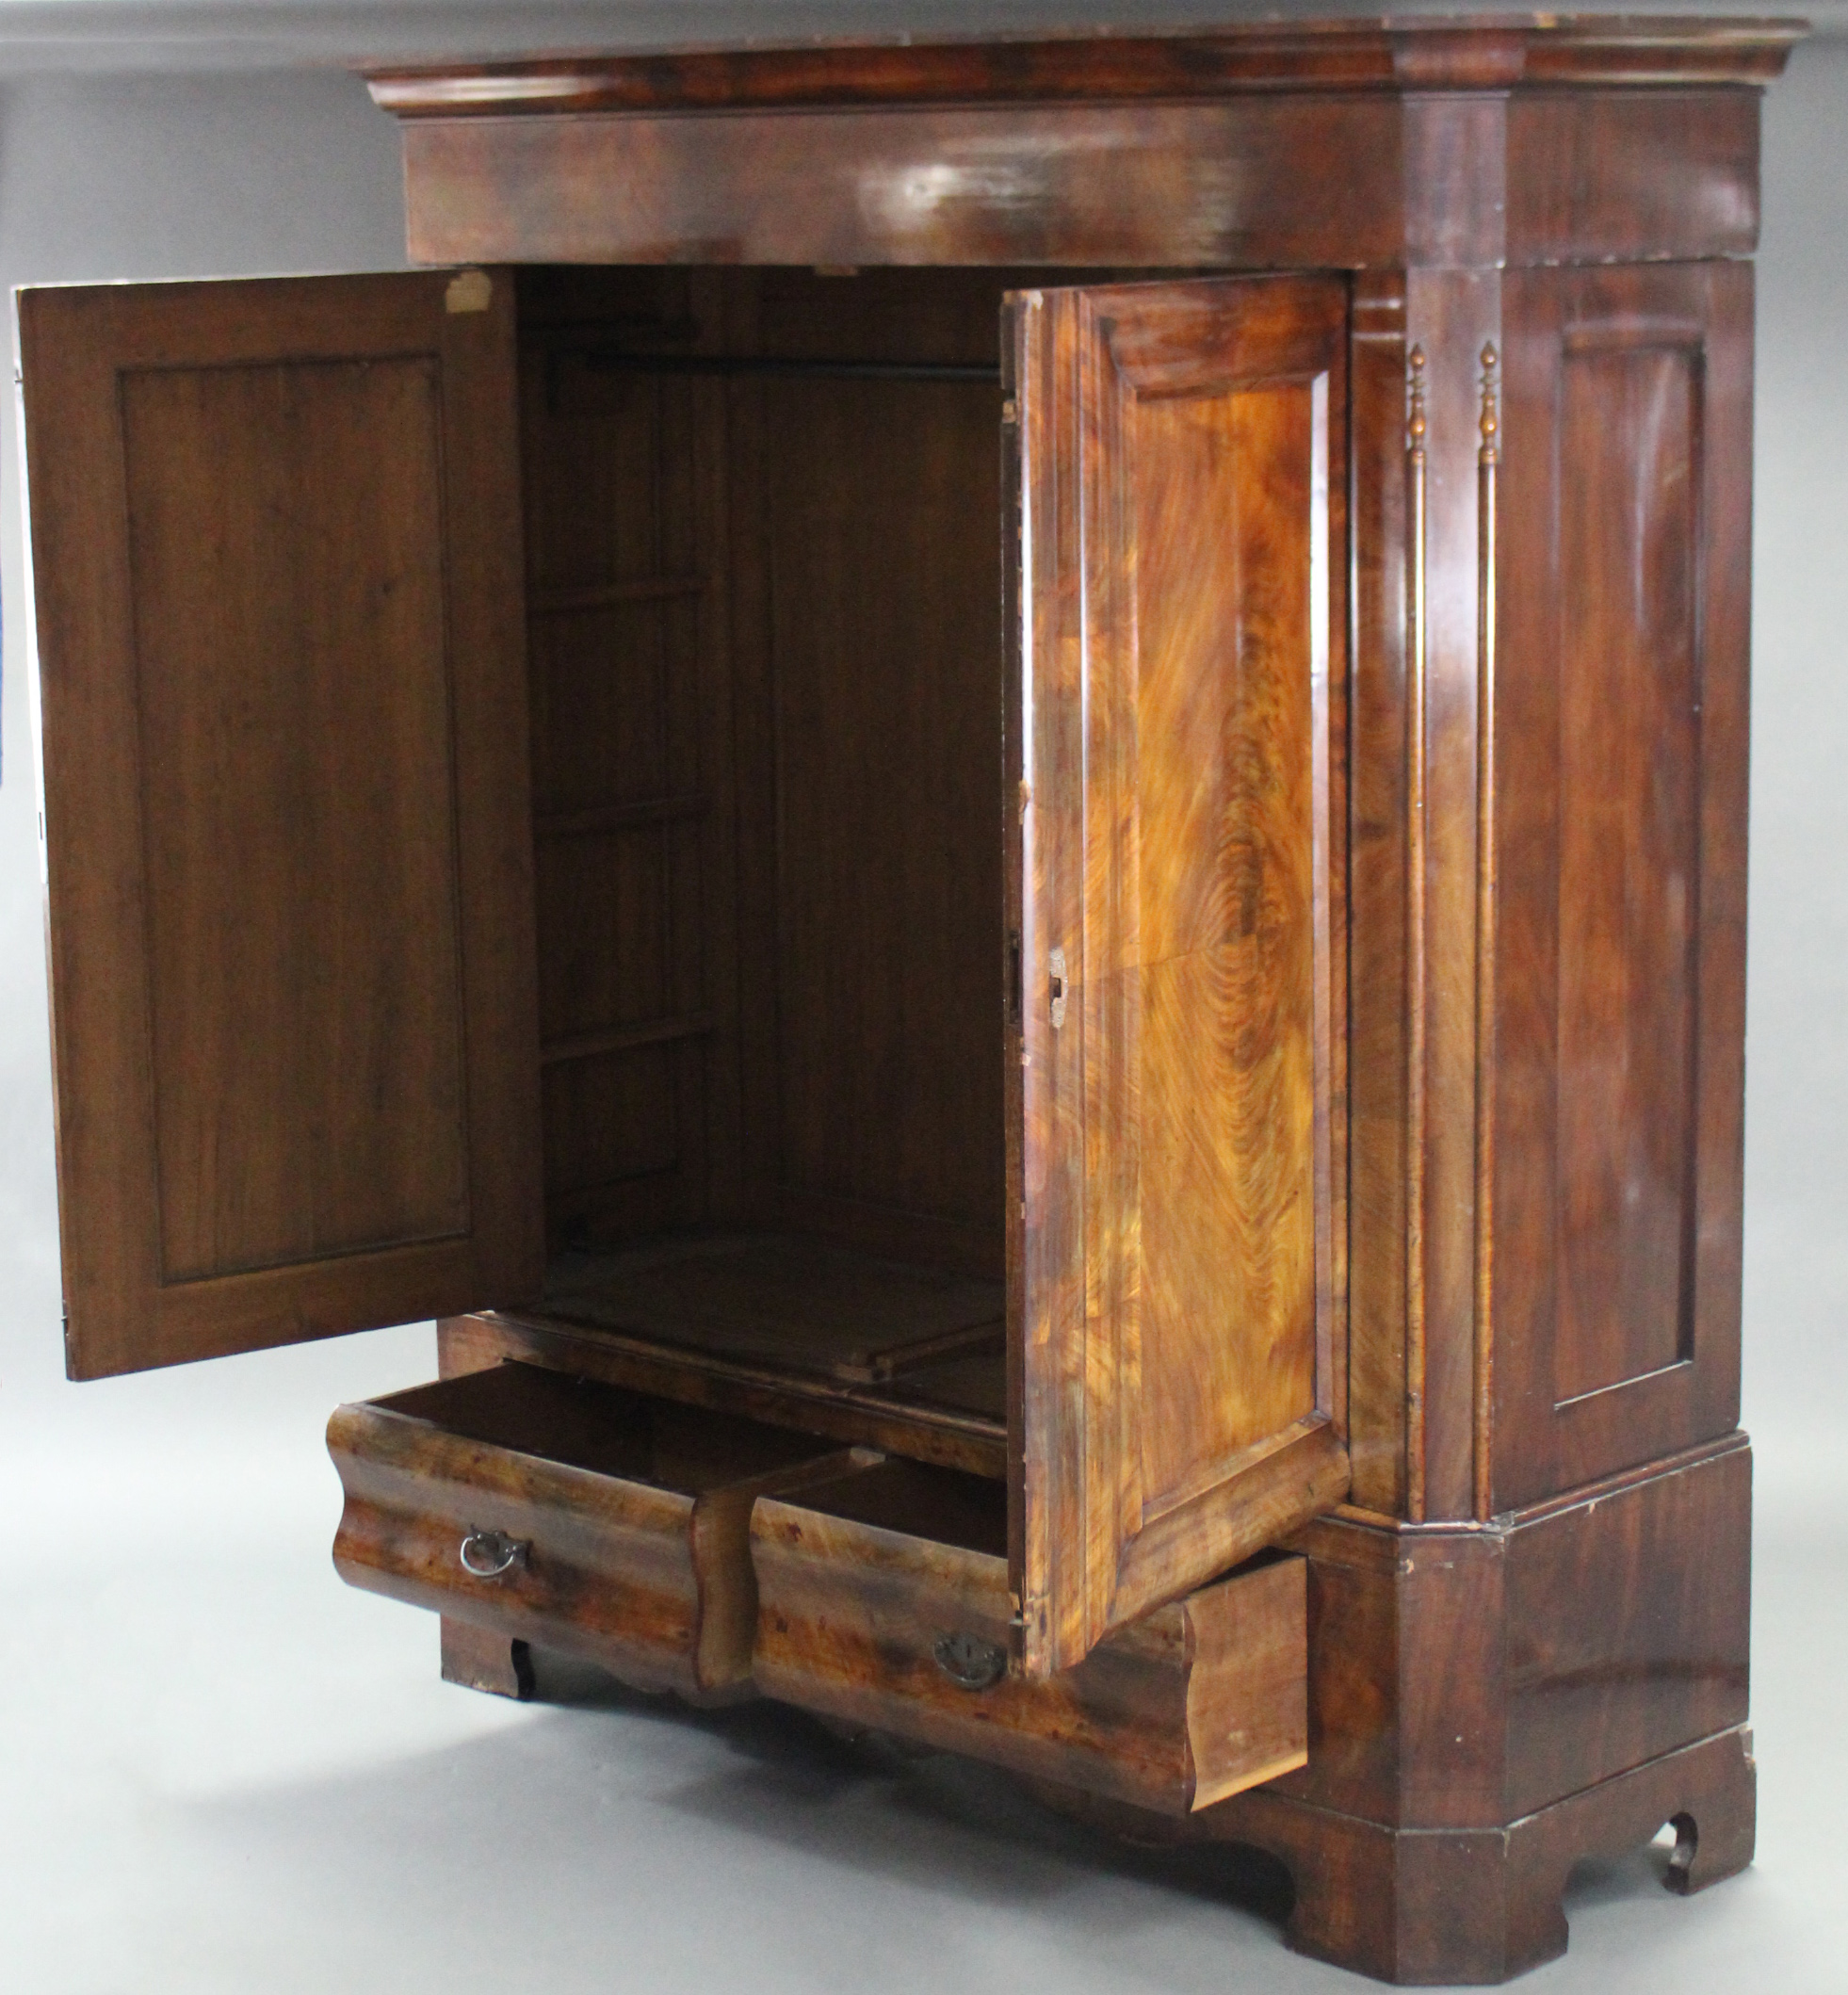 A 19th century CONTINENTAL FIGURED MAHOGANY WARDROBE, the upper part with cavetto cornice & enclosed - Image 2 of 3